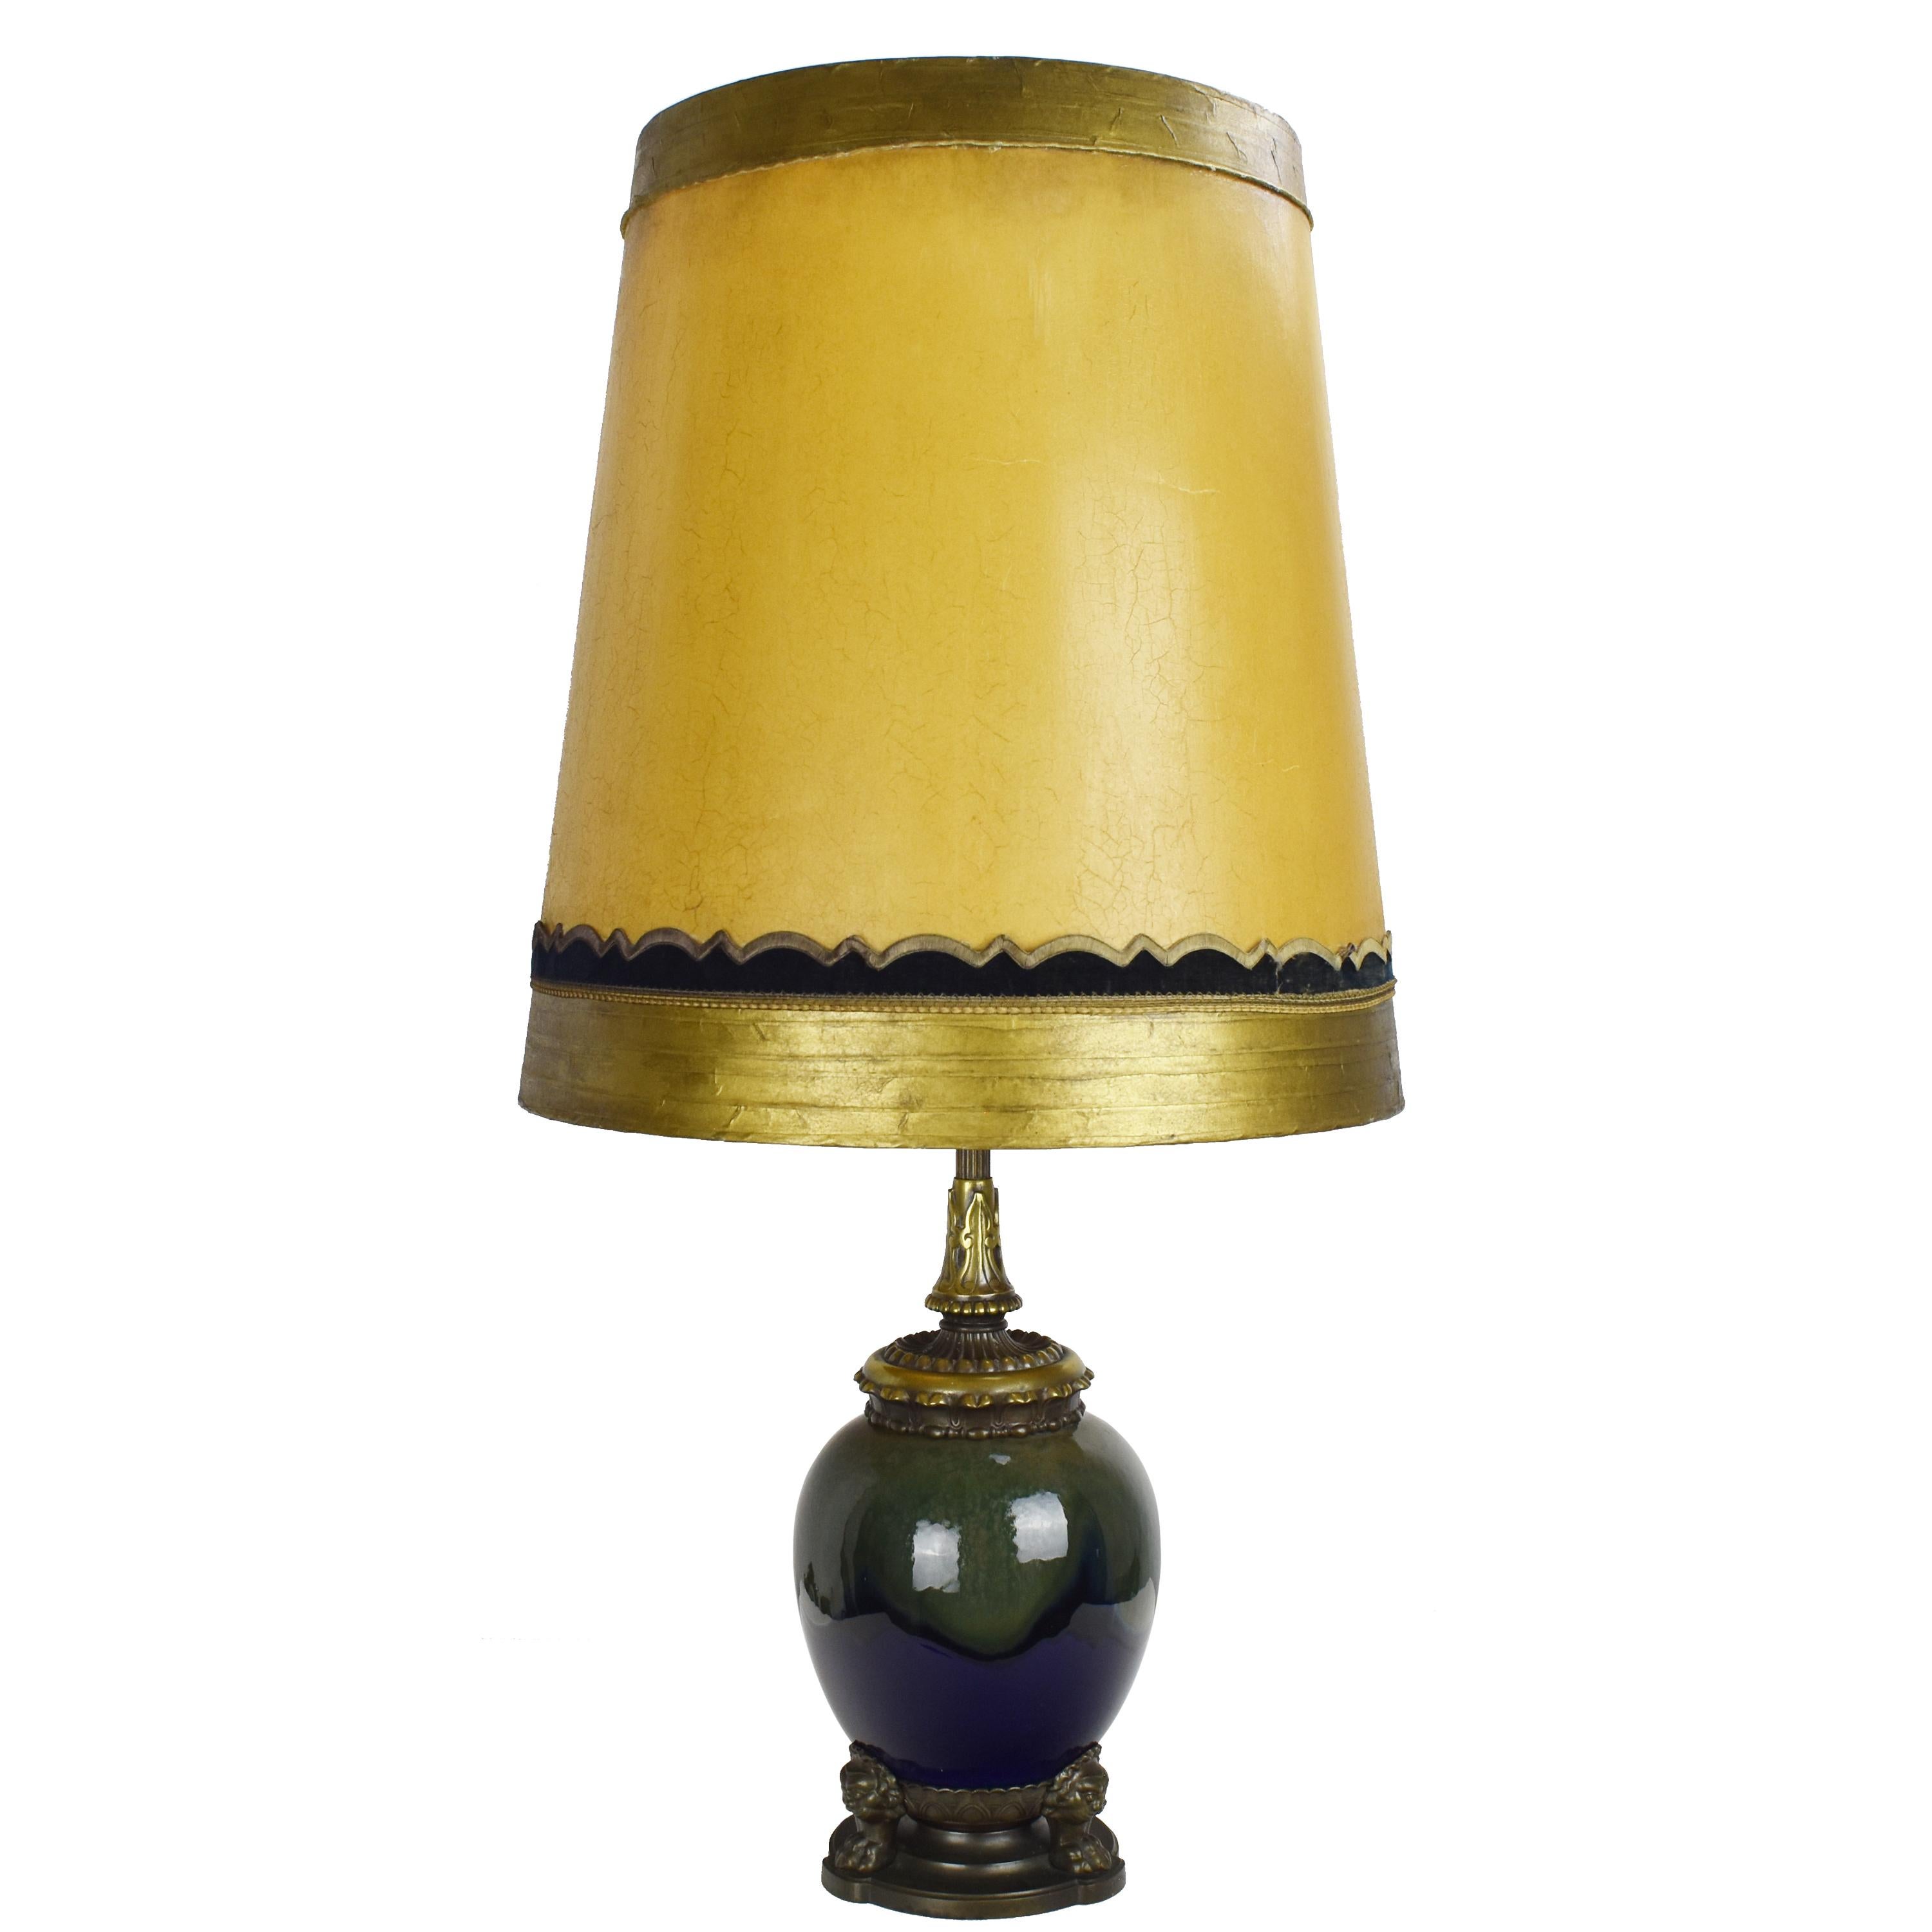 This antique table lamp with a solid bronze mount from Rosenthal dates back to around 1910. The porcelain body, reminiscent of a Chinese ginger jar, featuring a stunning runny glaze in dark green tones over a cobalt blue background. 
The mount,